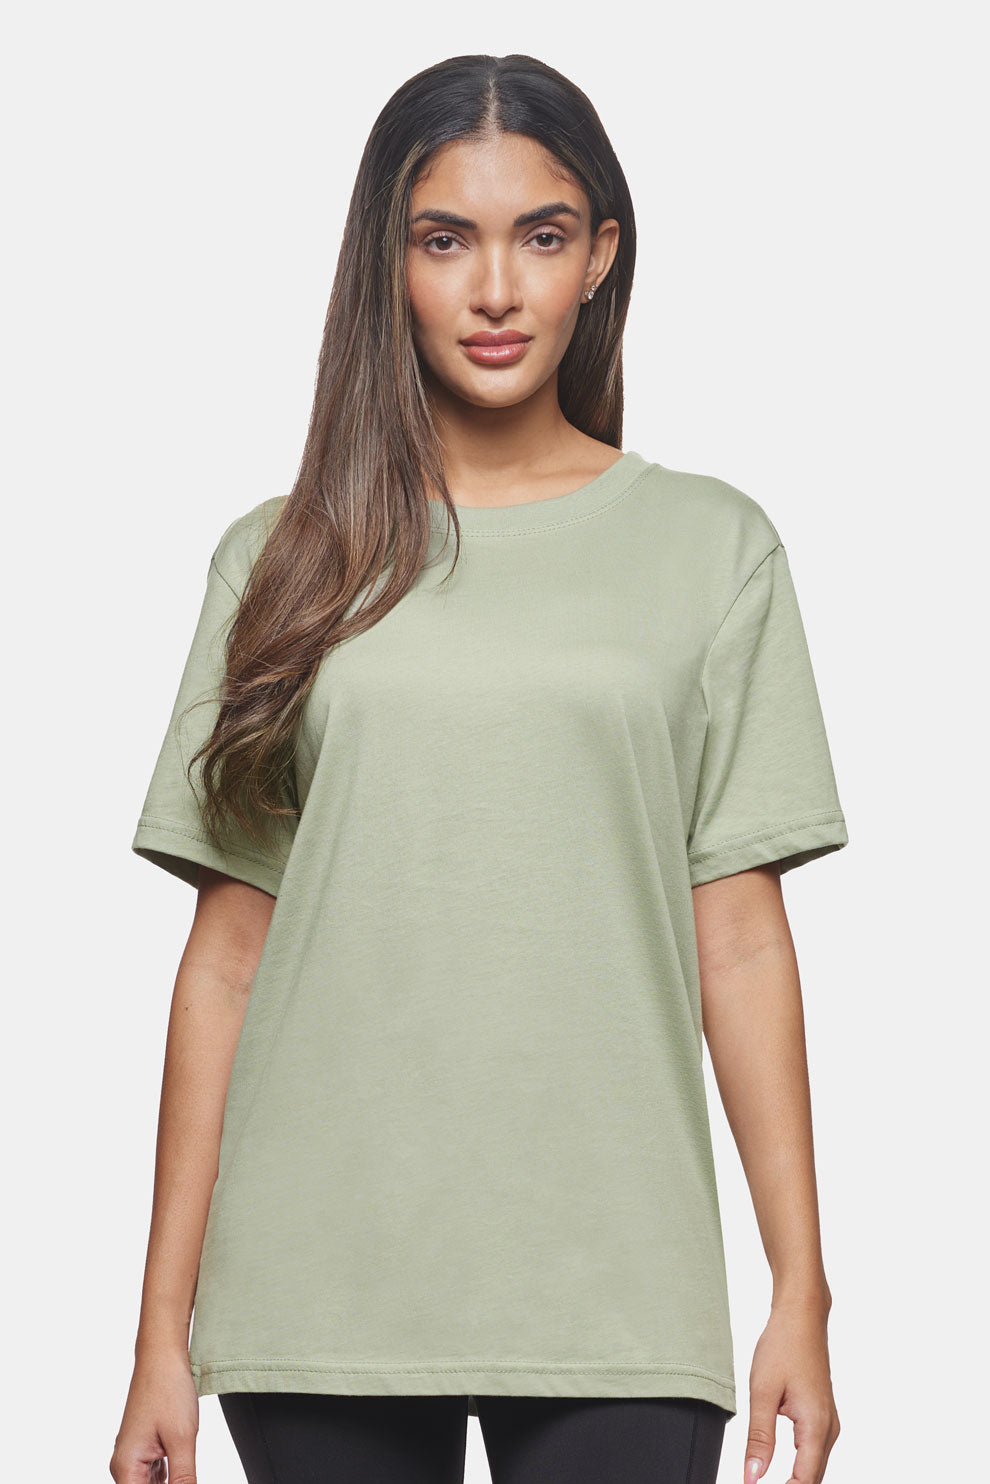 Expert Brand Apparel Unisex Organic Cotton Tee Made in USA in sage 4#color_sage